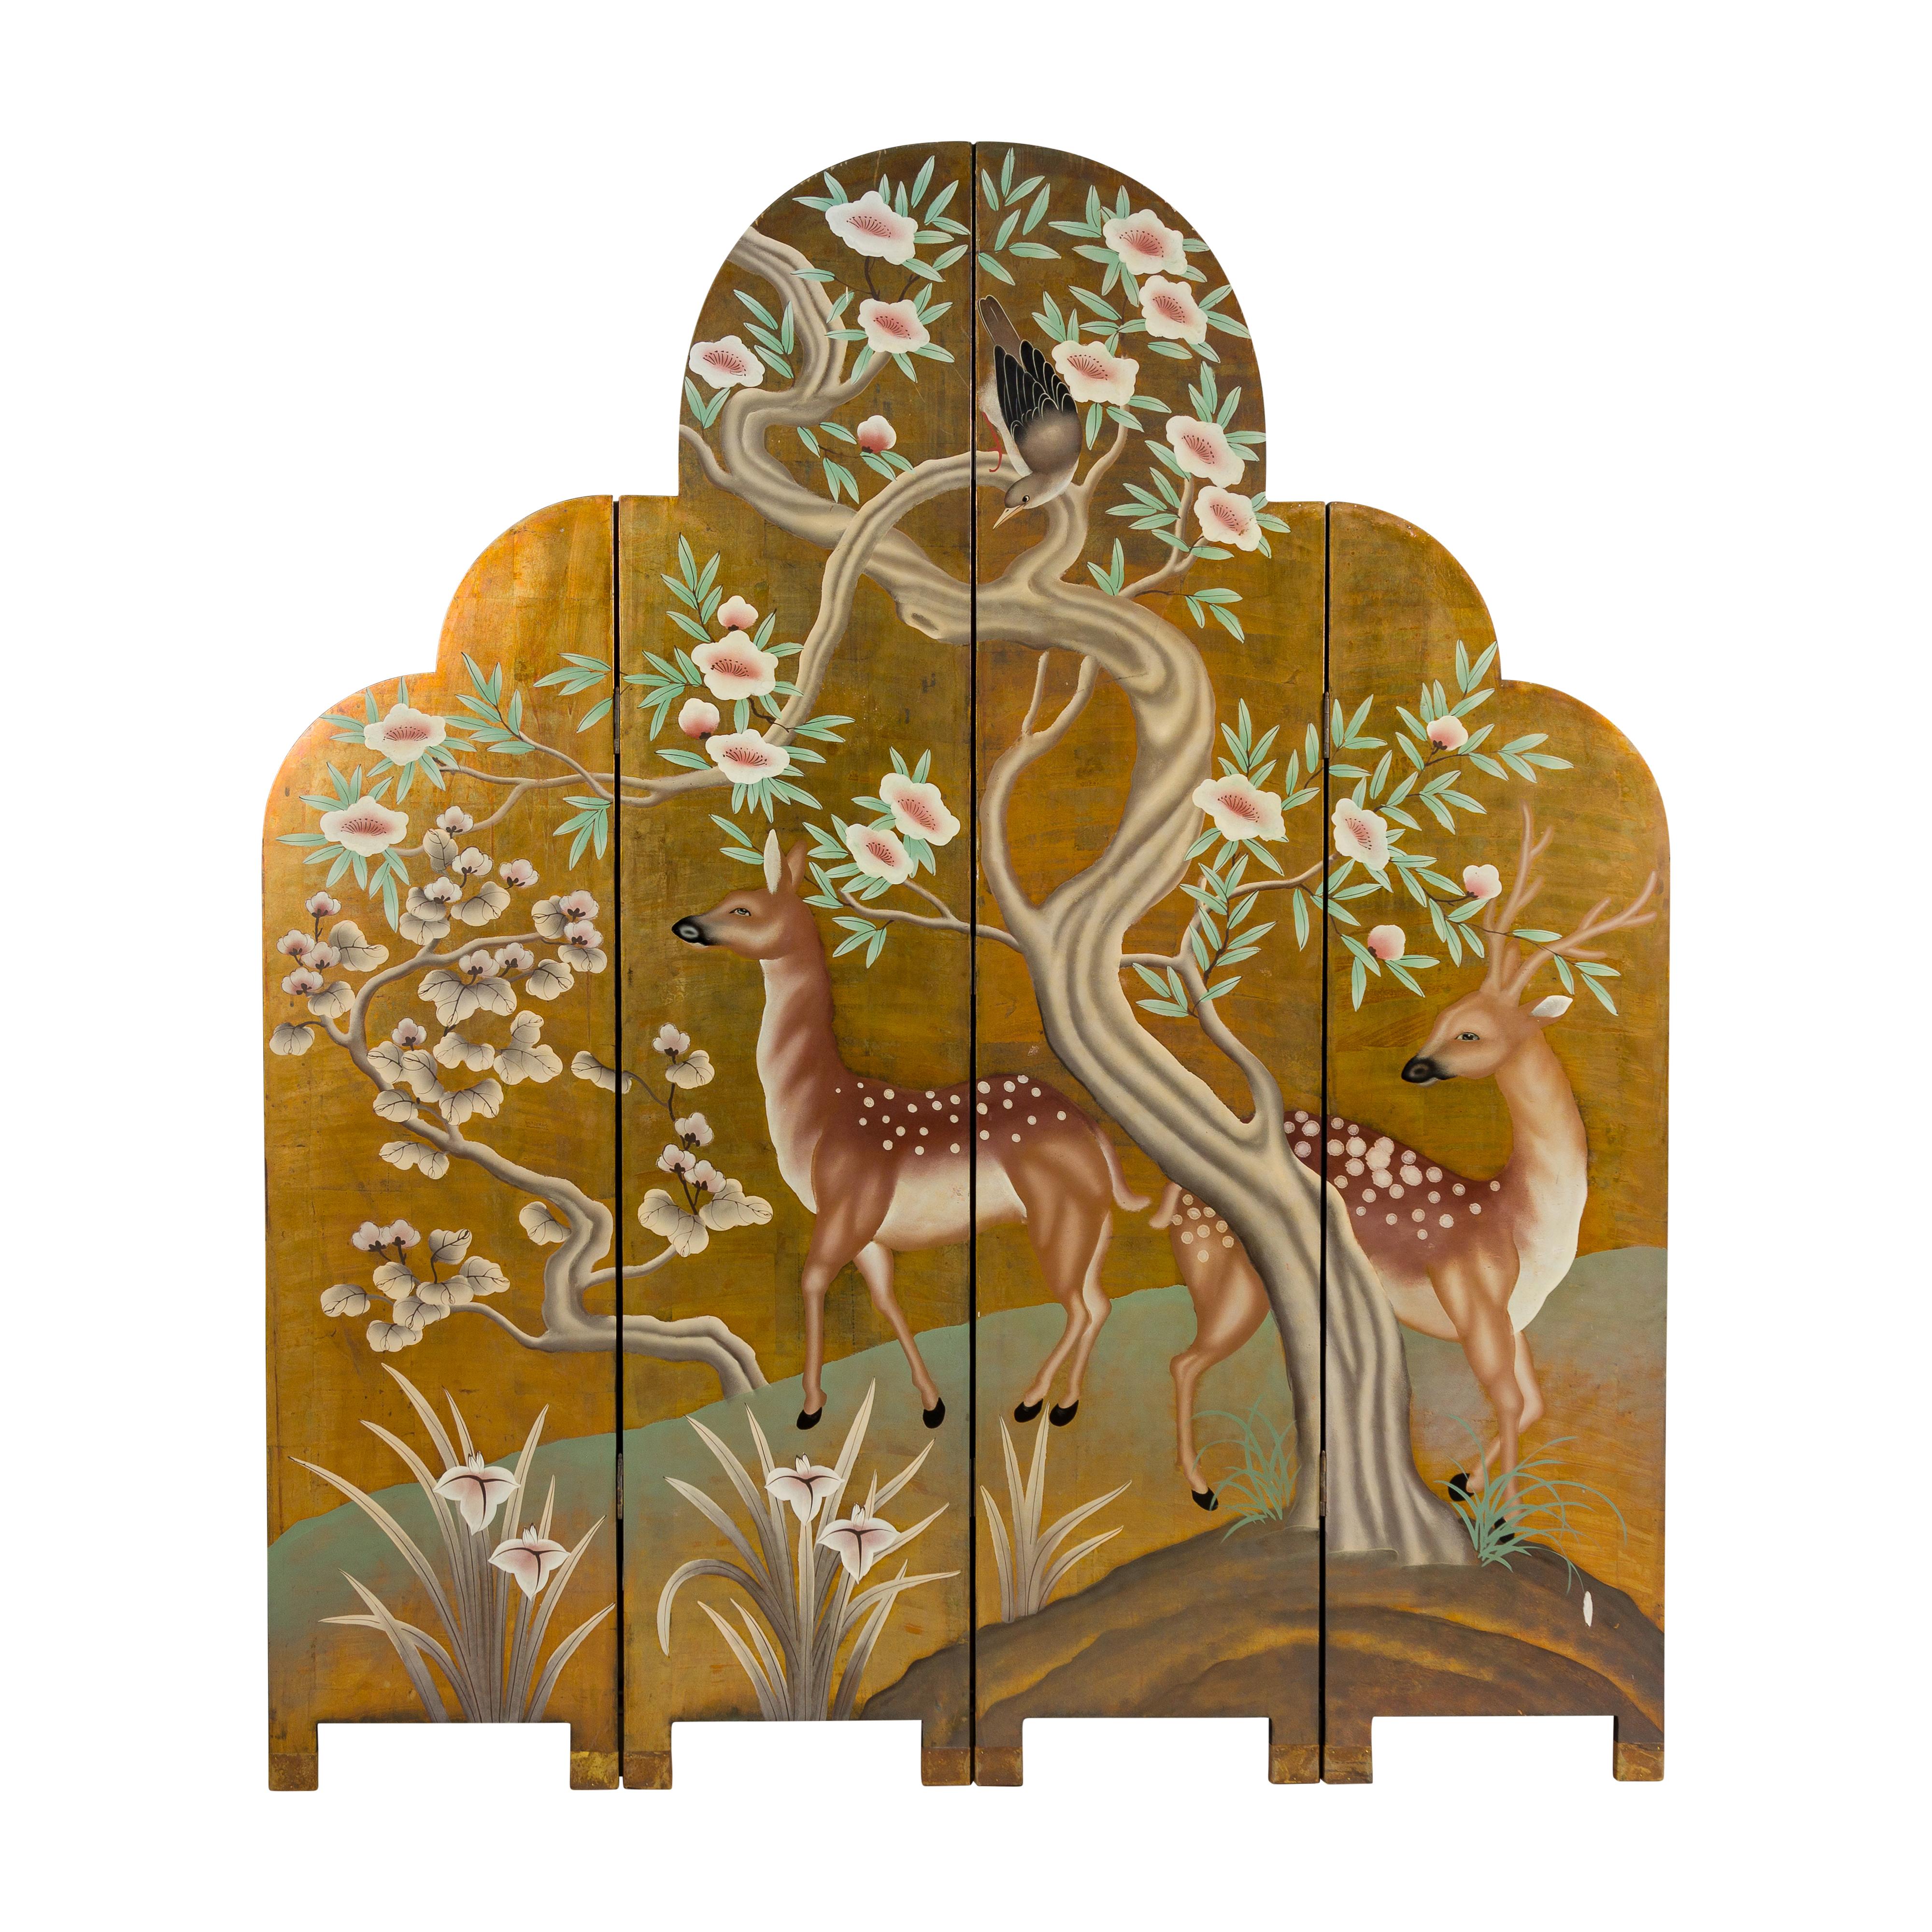 Four-Panel Gilded Wood Scalloped Top Screen with Deer, Trees and Flowers 10